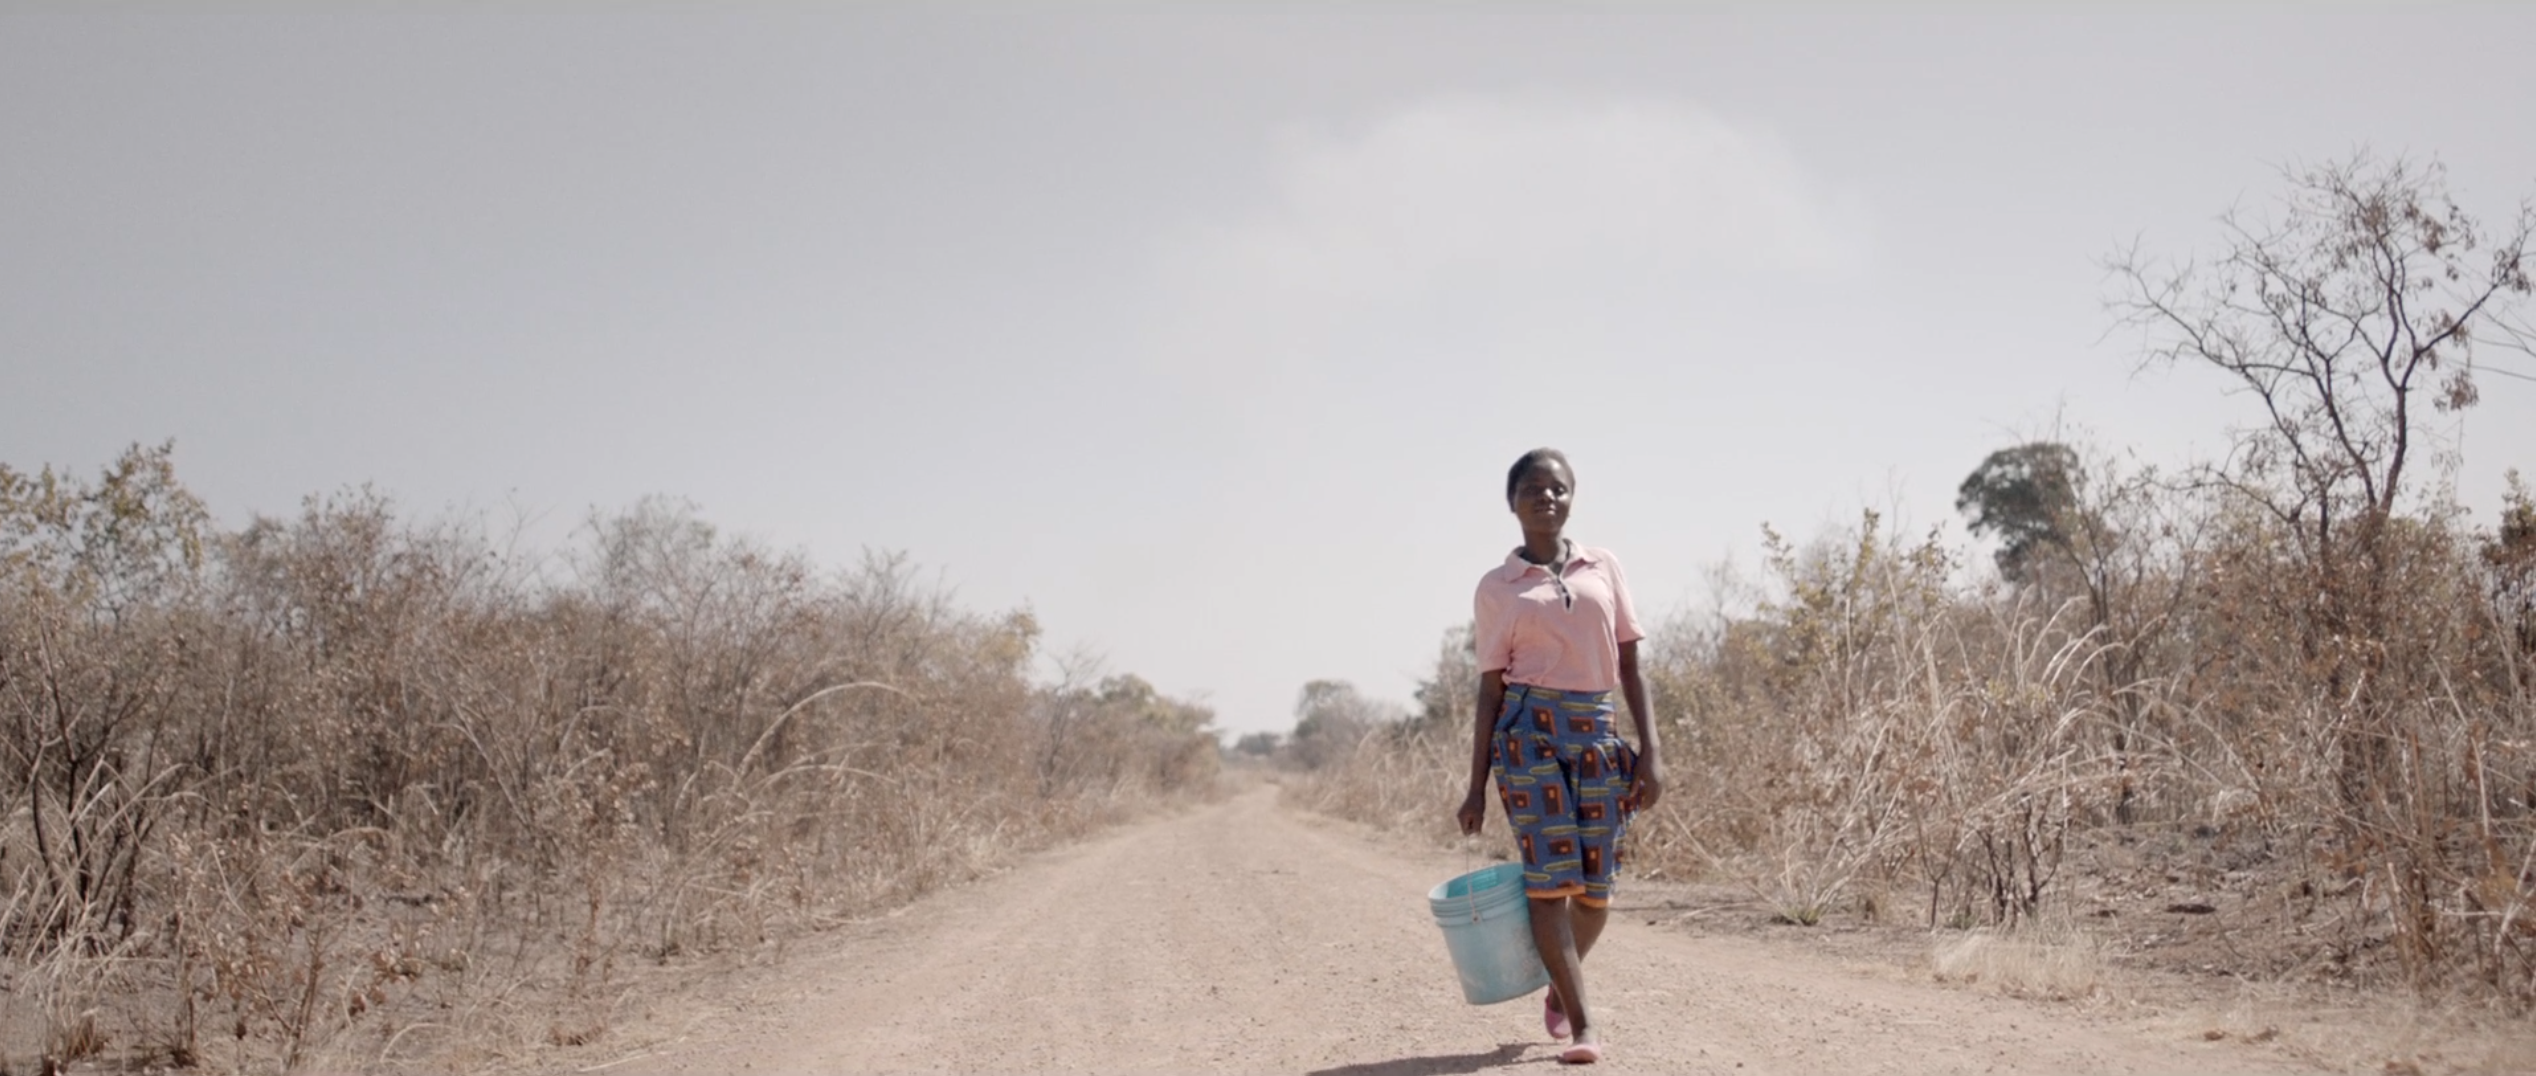 WaterAid Launches New Ad Campaign Focusing on Progress Rather Than a Problem